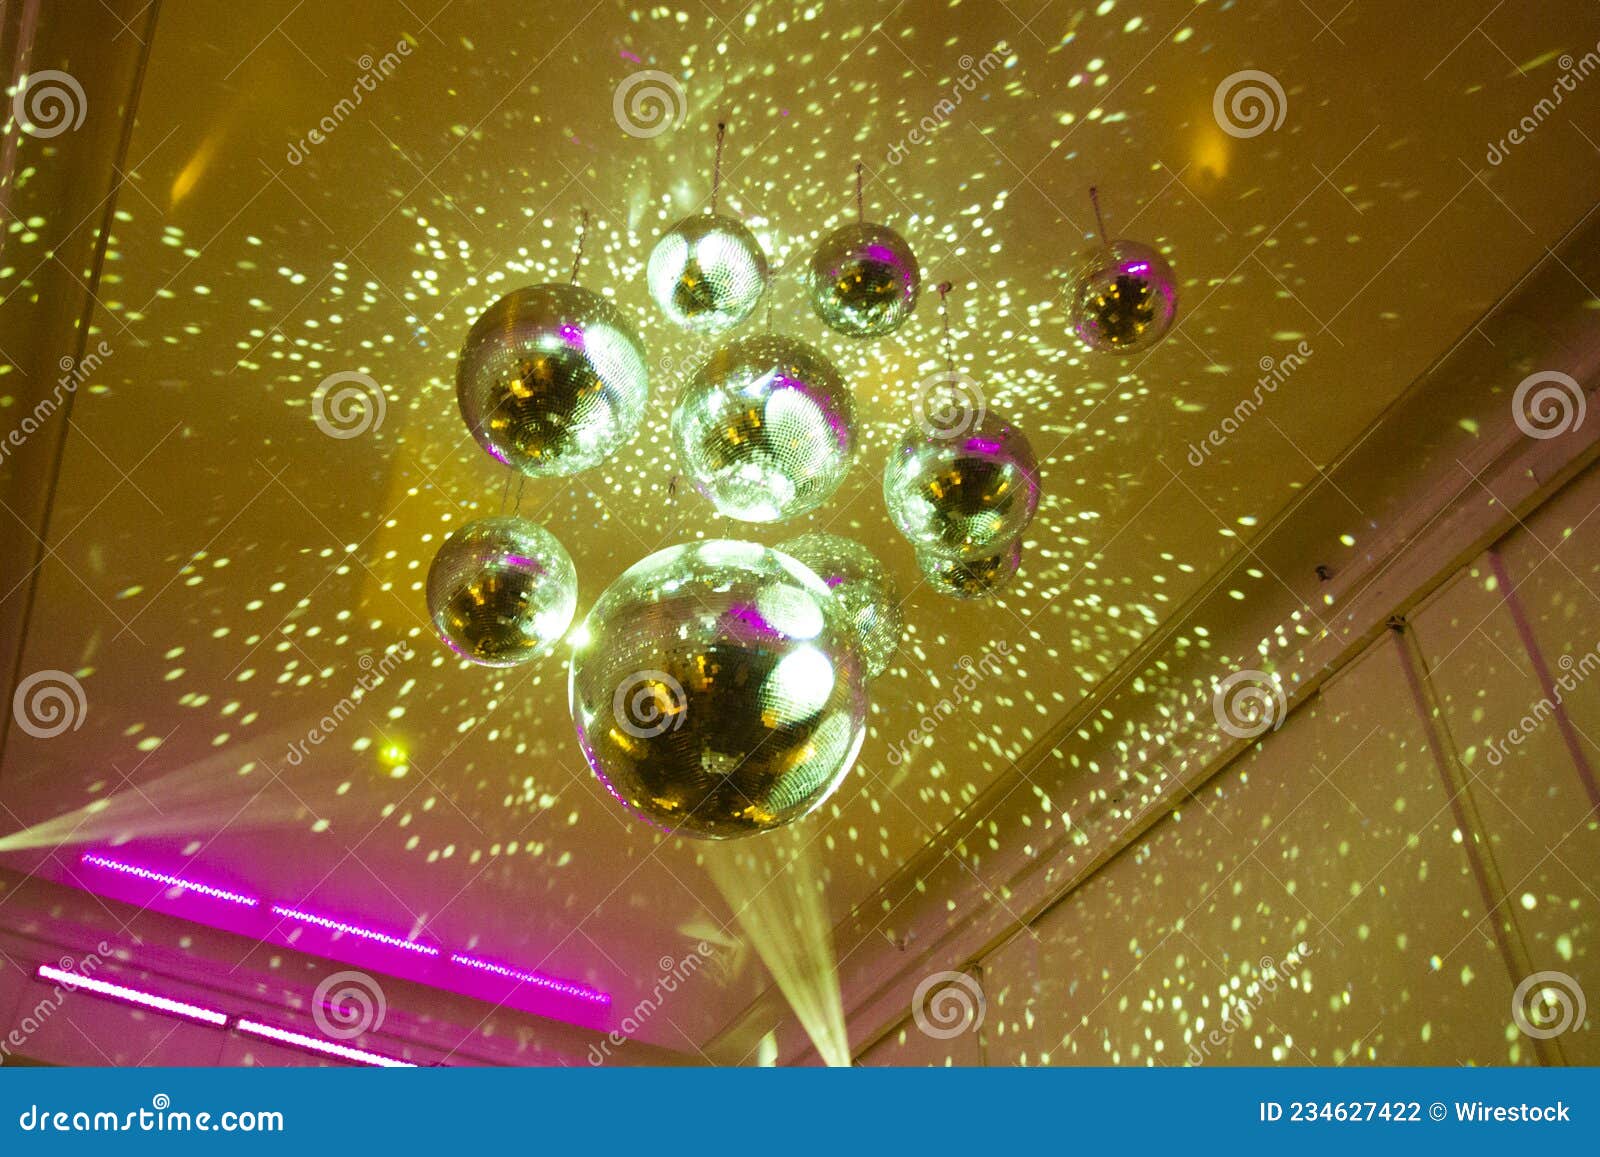 Shining Disco Balls Hanging from the Ceiling. Stock Photo - Image of ...